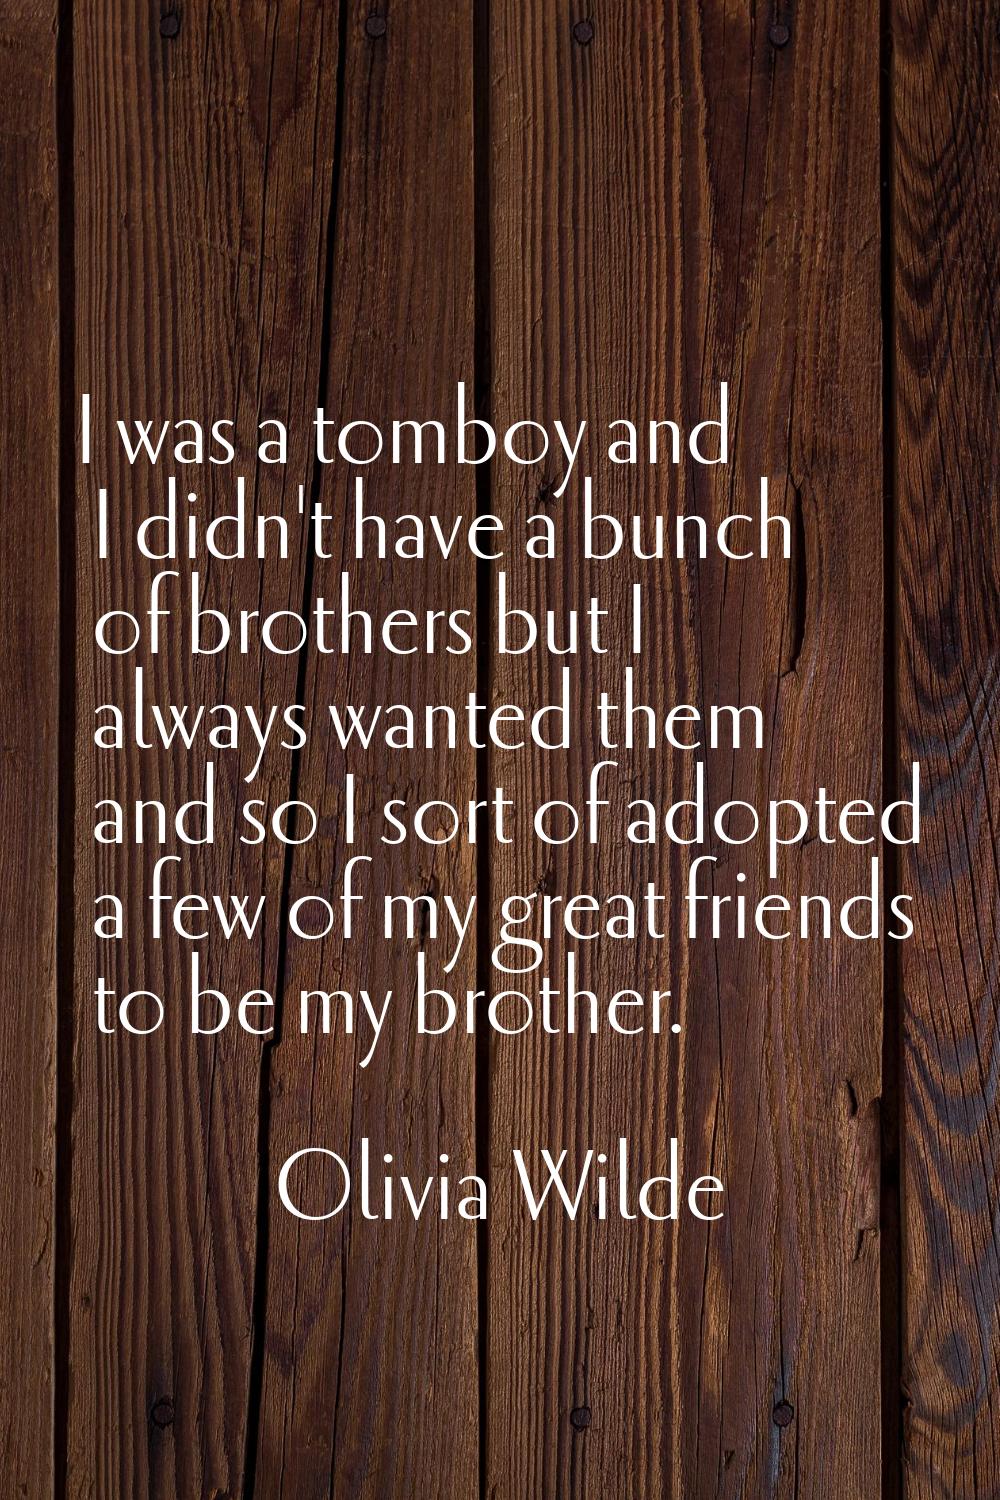 I was a tomboy and I didn't have a bunch of brothers but I always wanted them and so I sort of adop